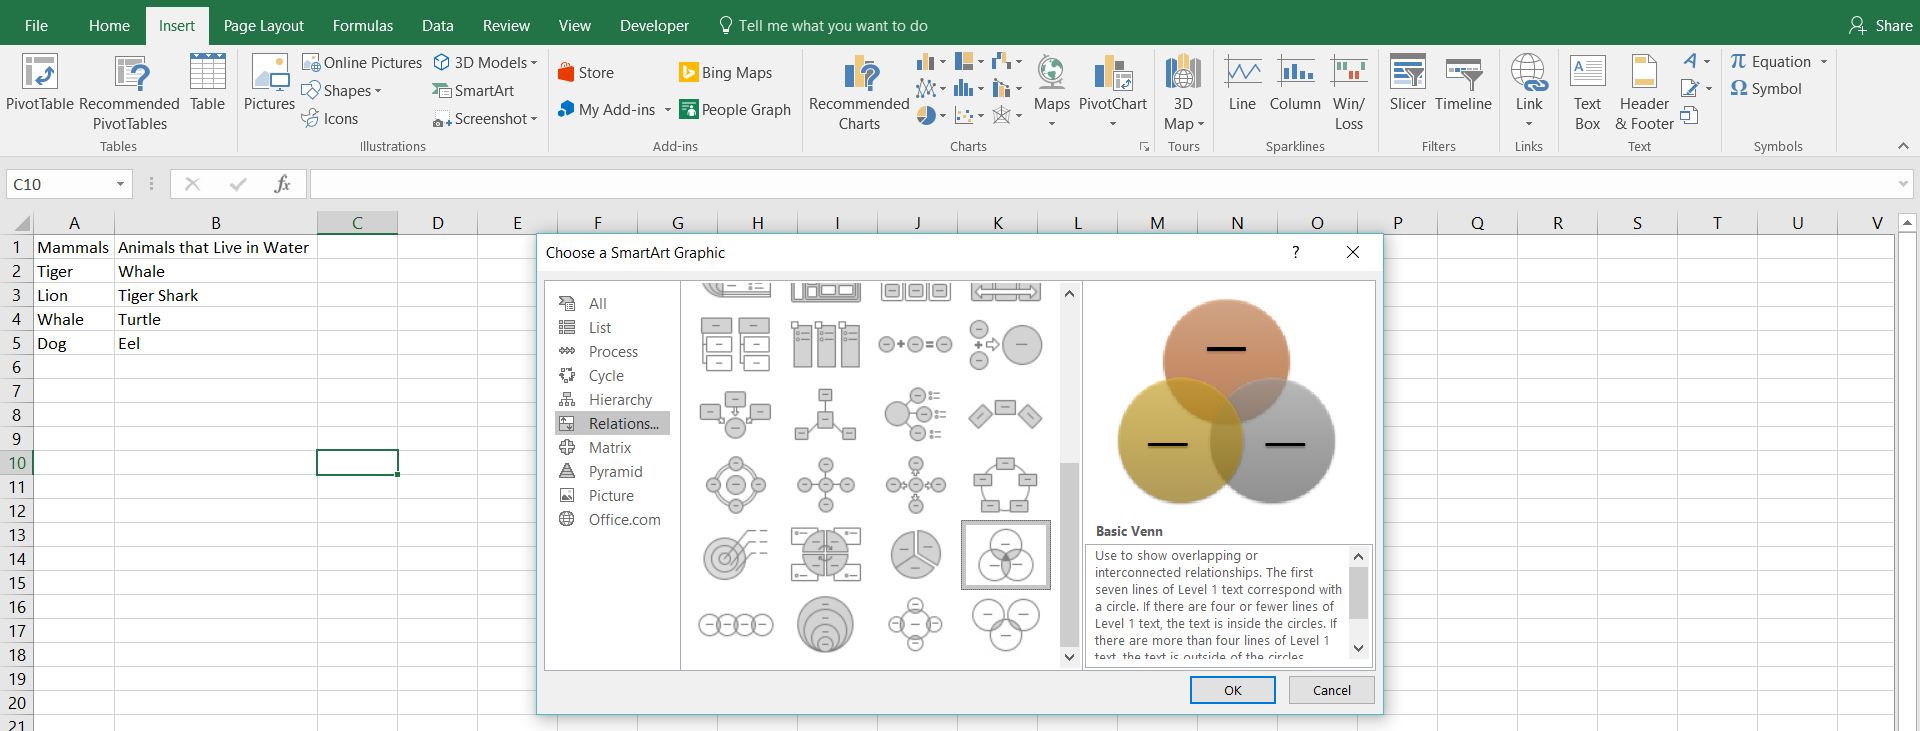 How To Create A Venn Diagram In Word How To Make A Venn Diagram In Excel Lucidchart